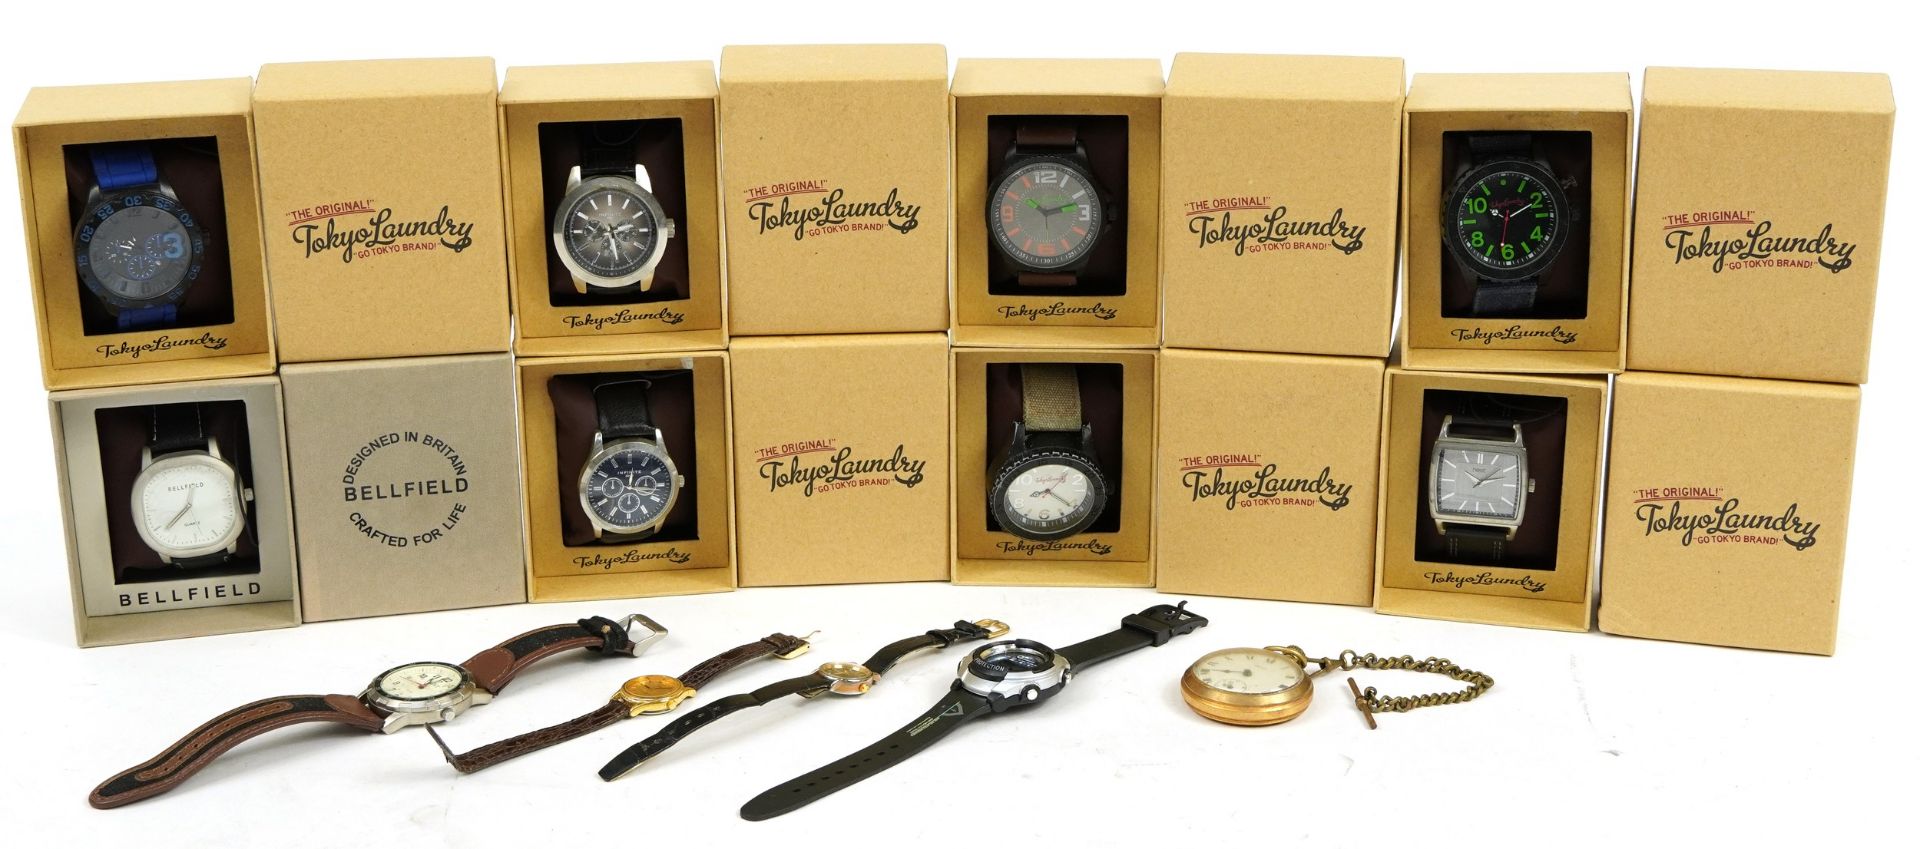 Wristwatches and pocket watches including Bellfield and Tokyo Laundry with boxes